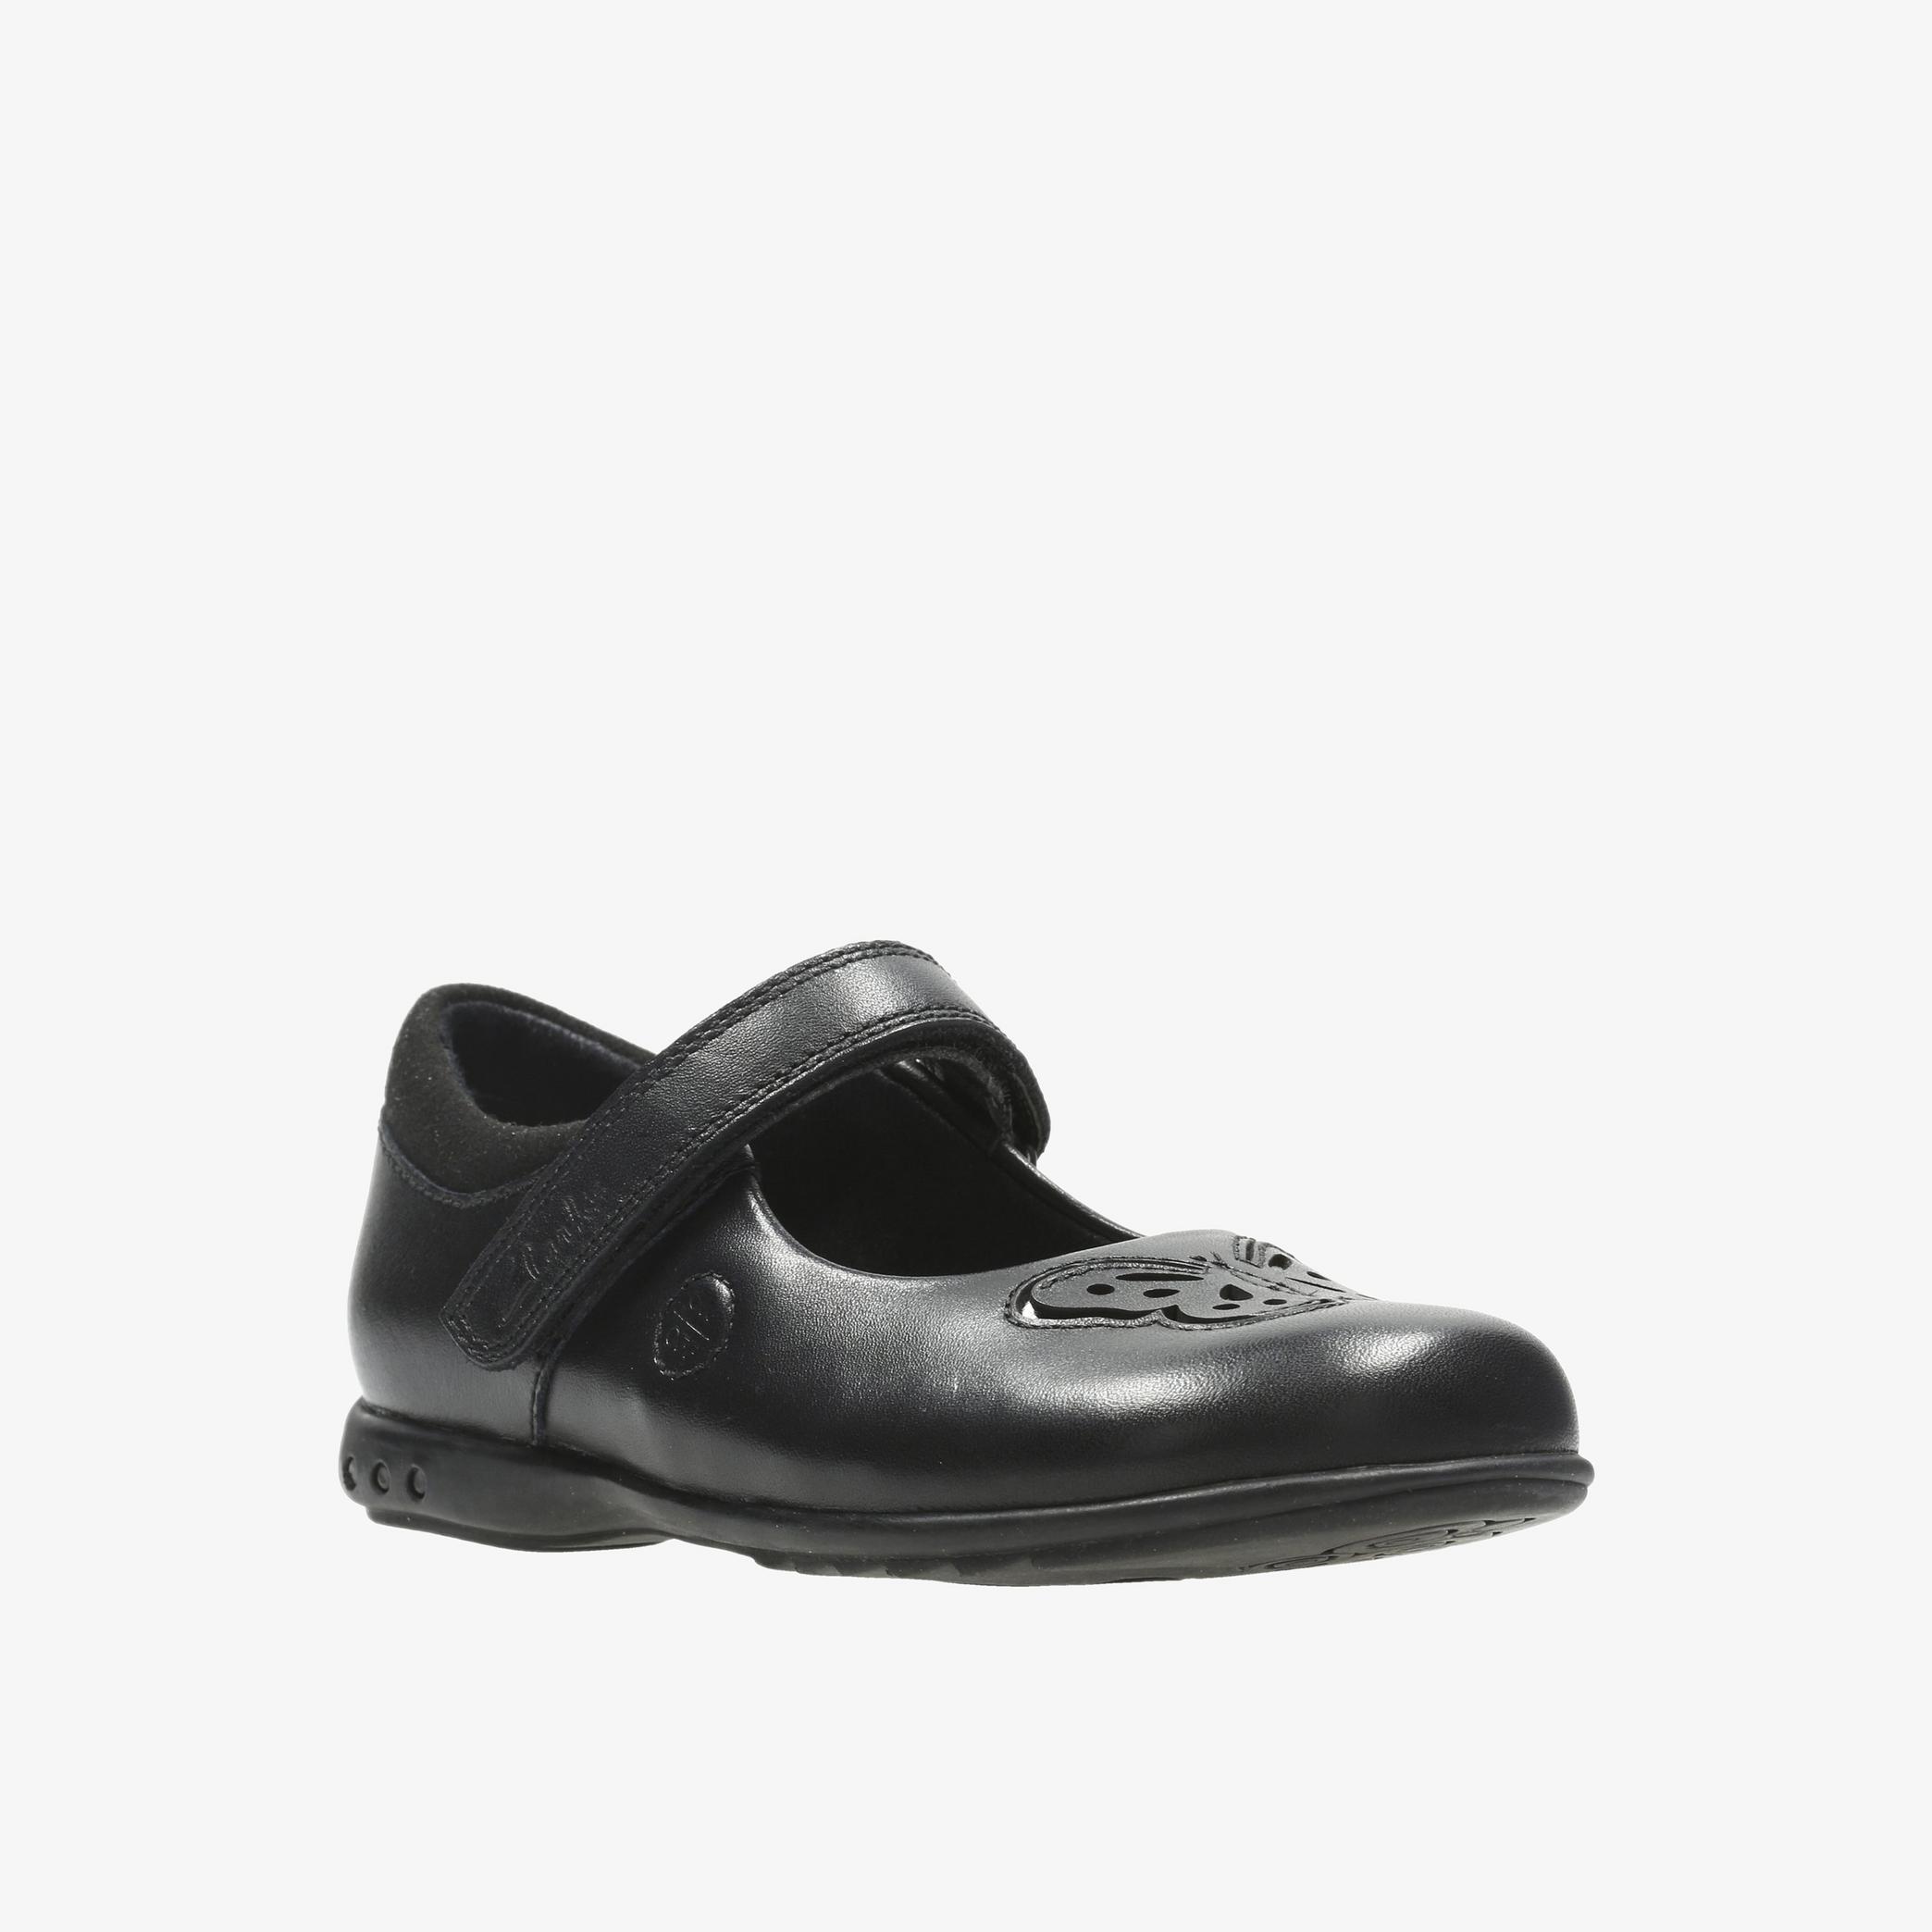 Trixi Rose Toddler Black Leather Shoes, view 3 of 4